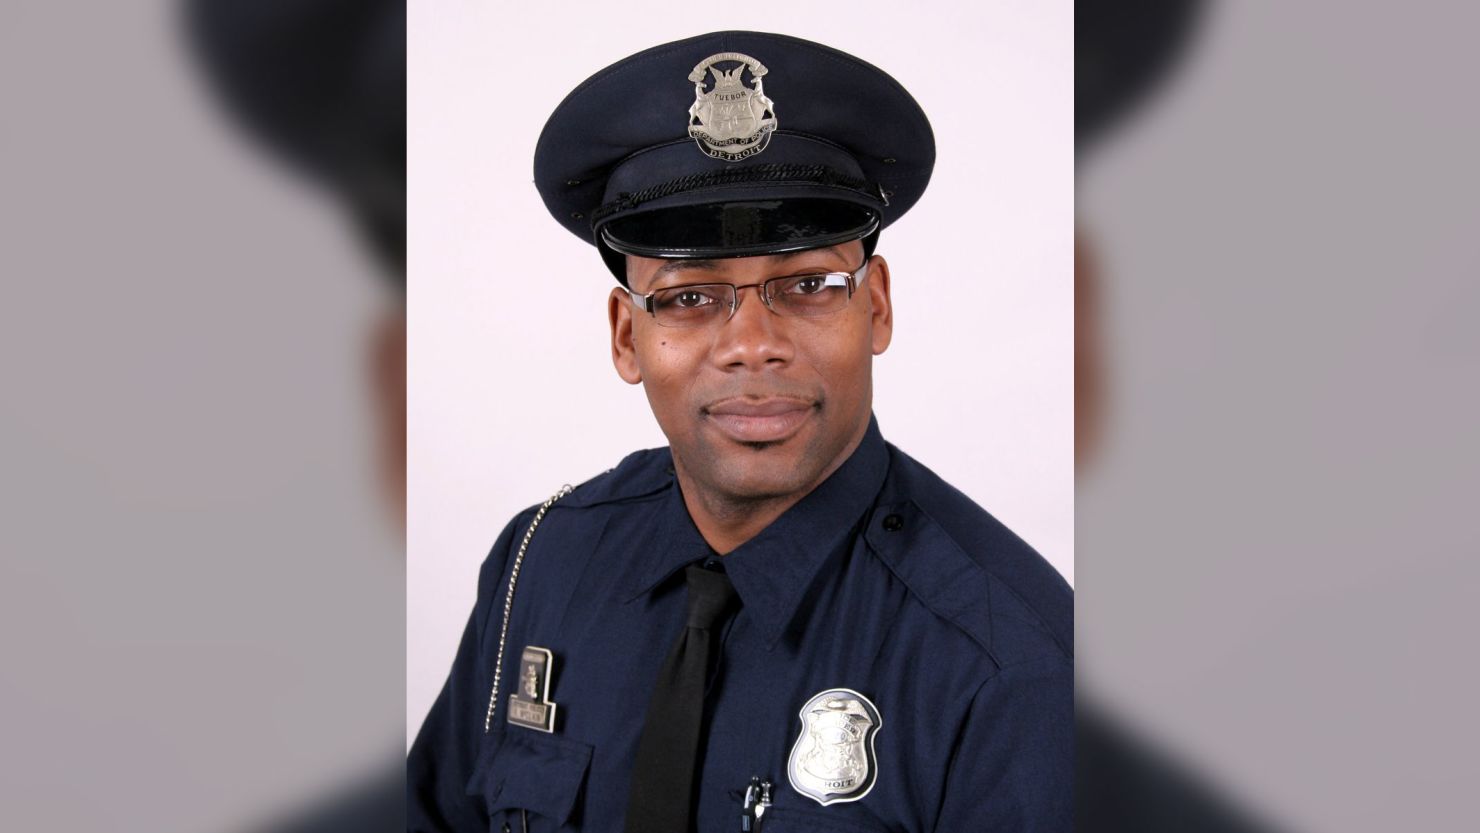 Officer McClain, 46, was married for 10 years and was the father of two stepchildren.